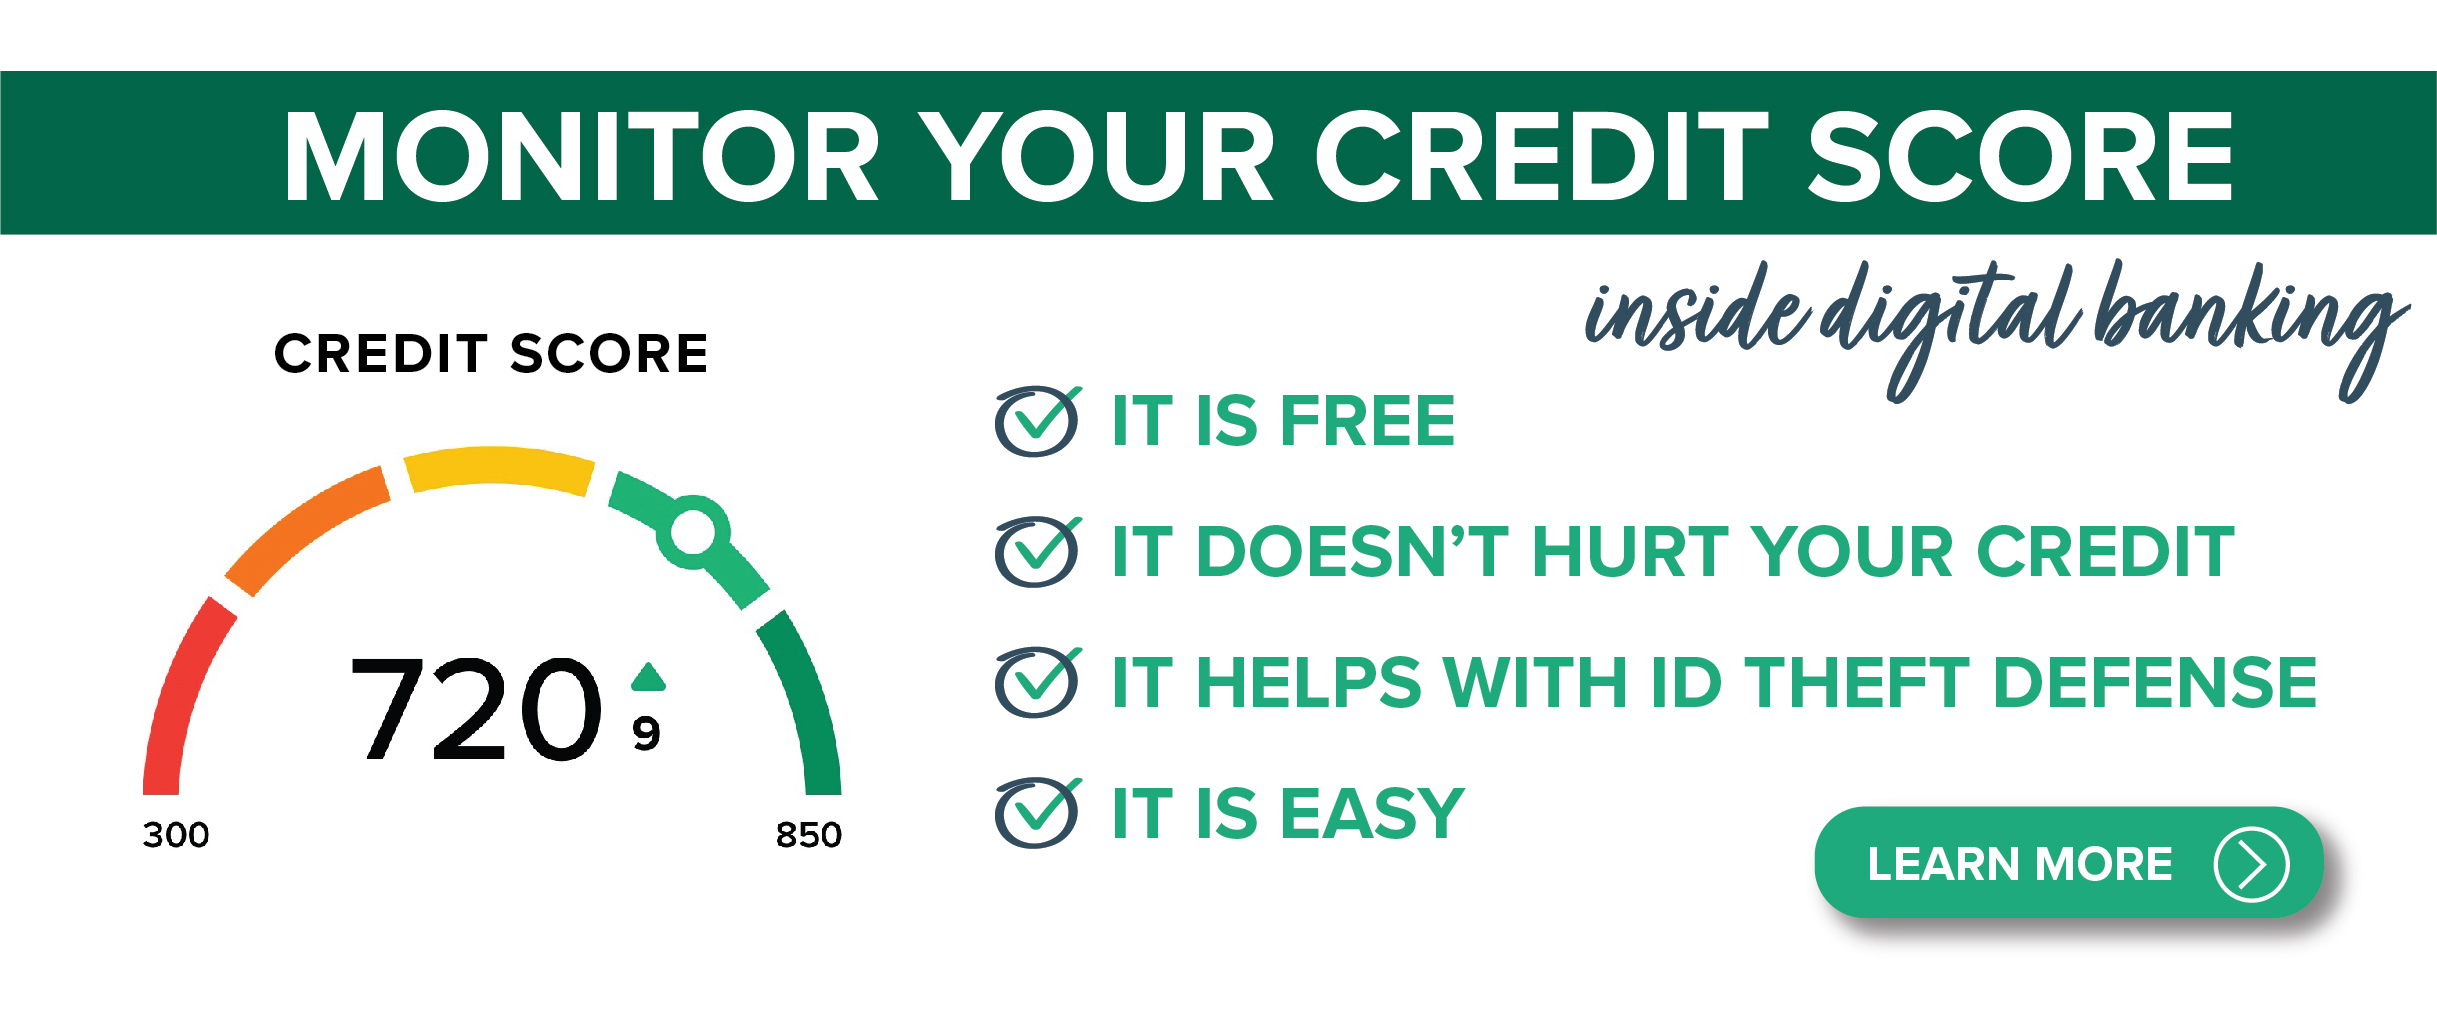 monitor your credit score inside digital banking
it is free
it doesn't hurt your credit score
it helps with id theft defense
it is easy